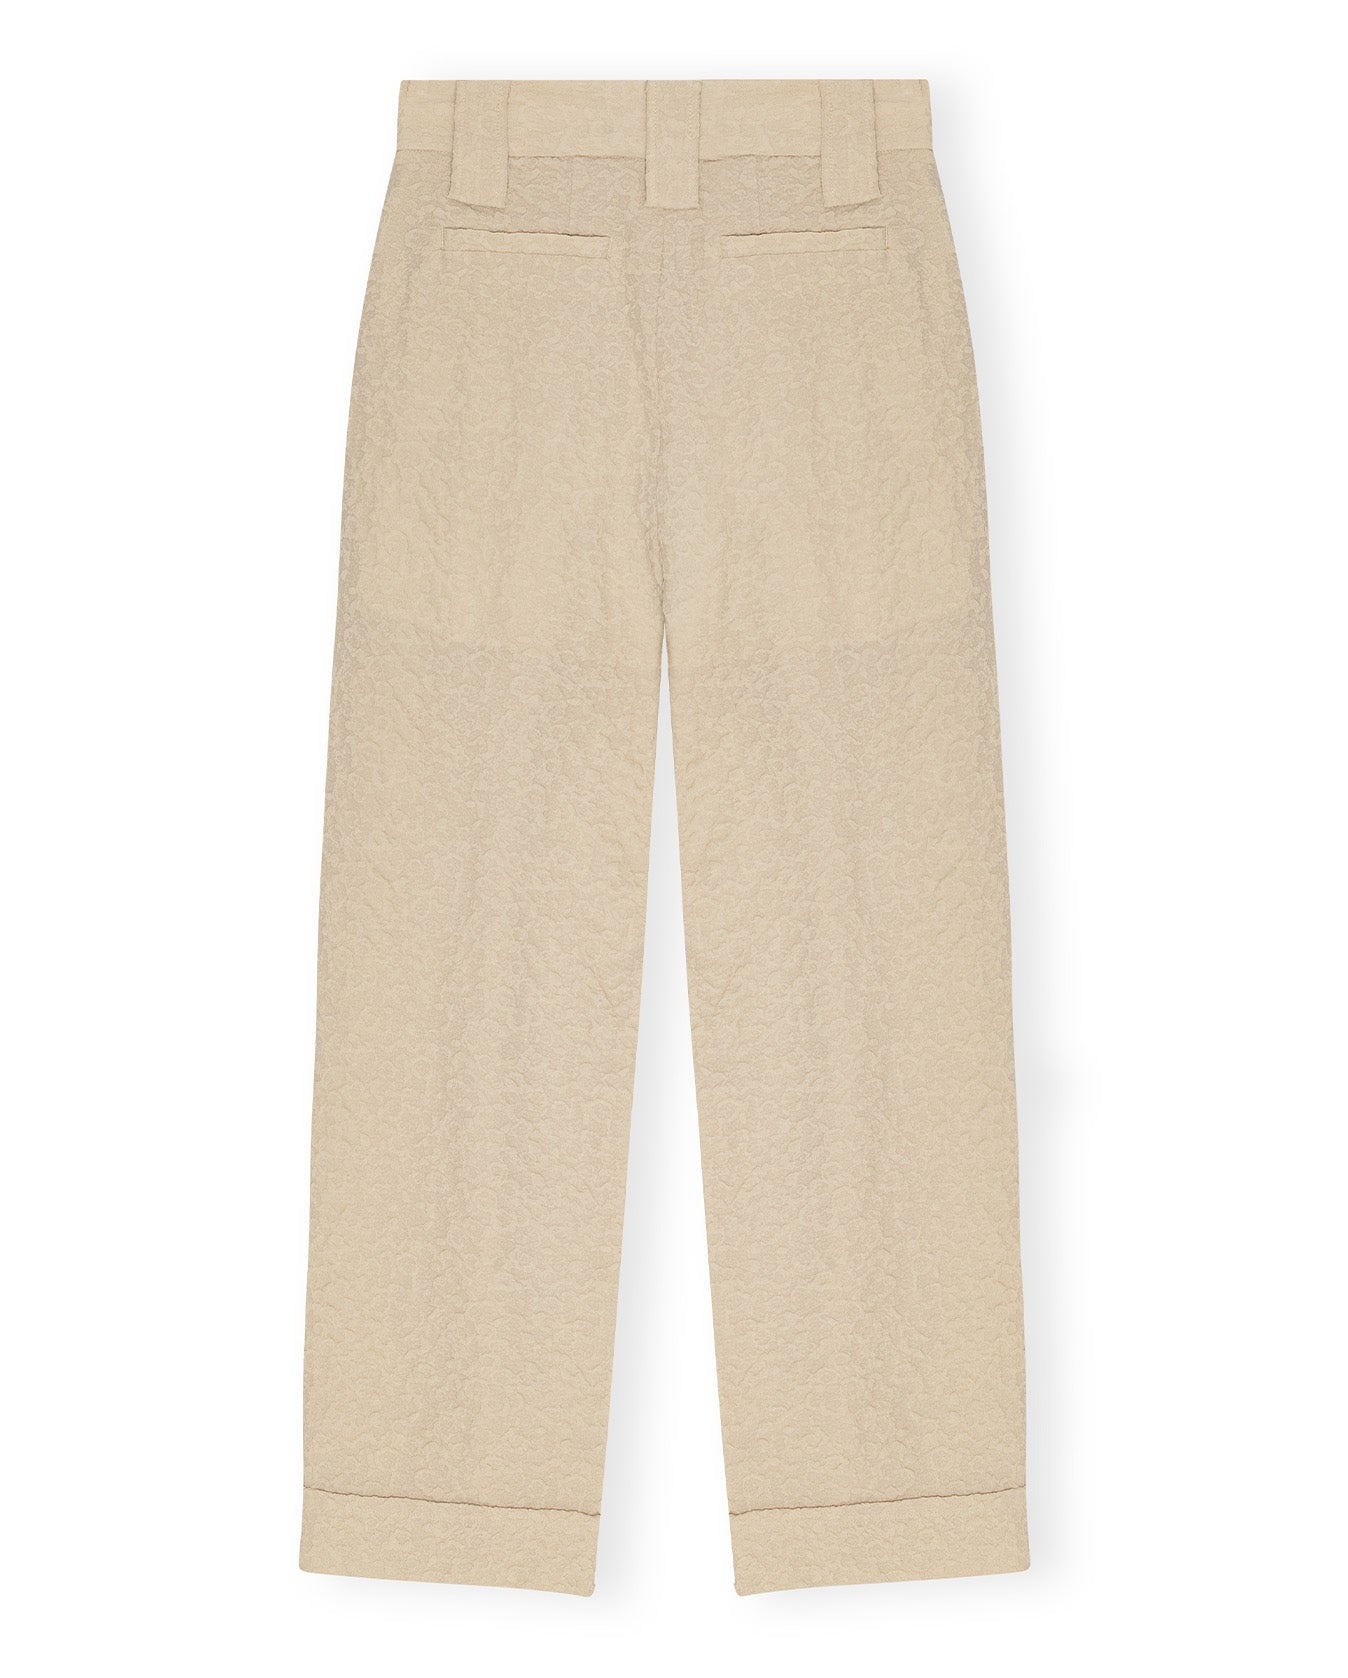 Textured Suiting Mid Waist Pants - 7